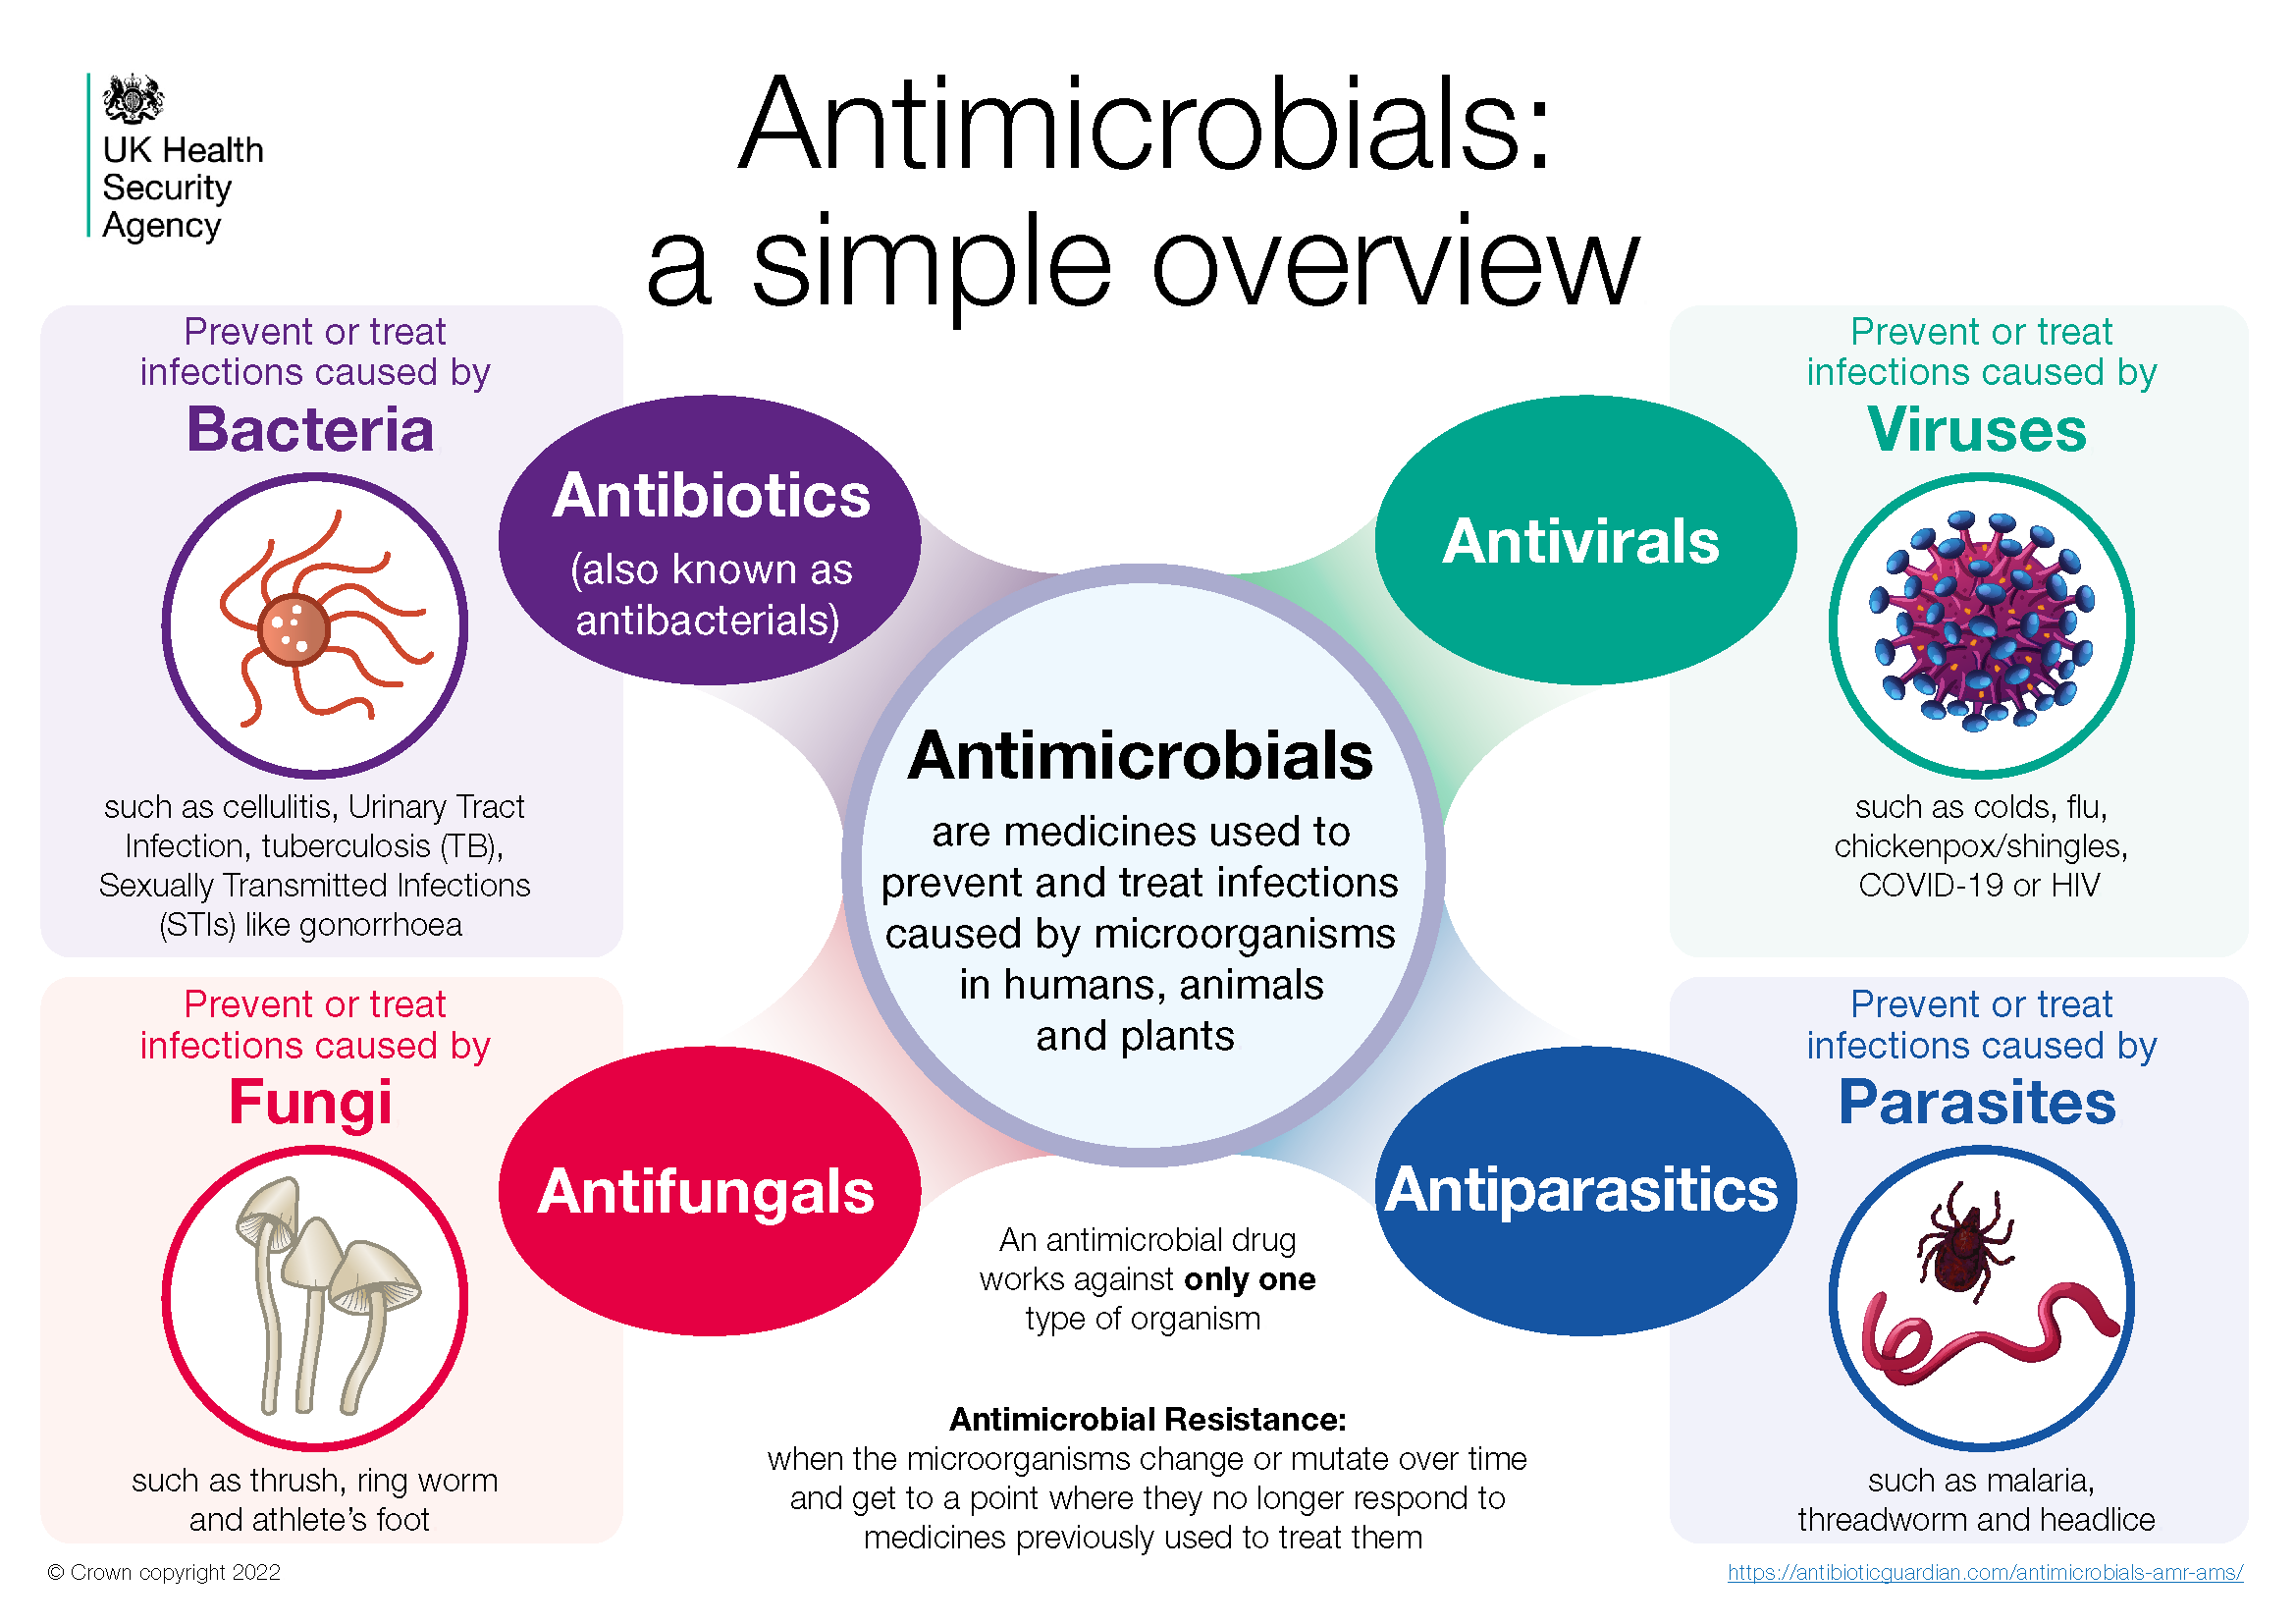 What Do You Do When Antimicrobials Stop Working?